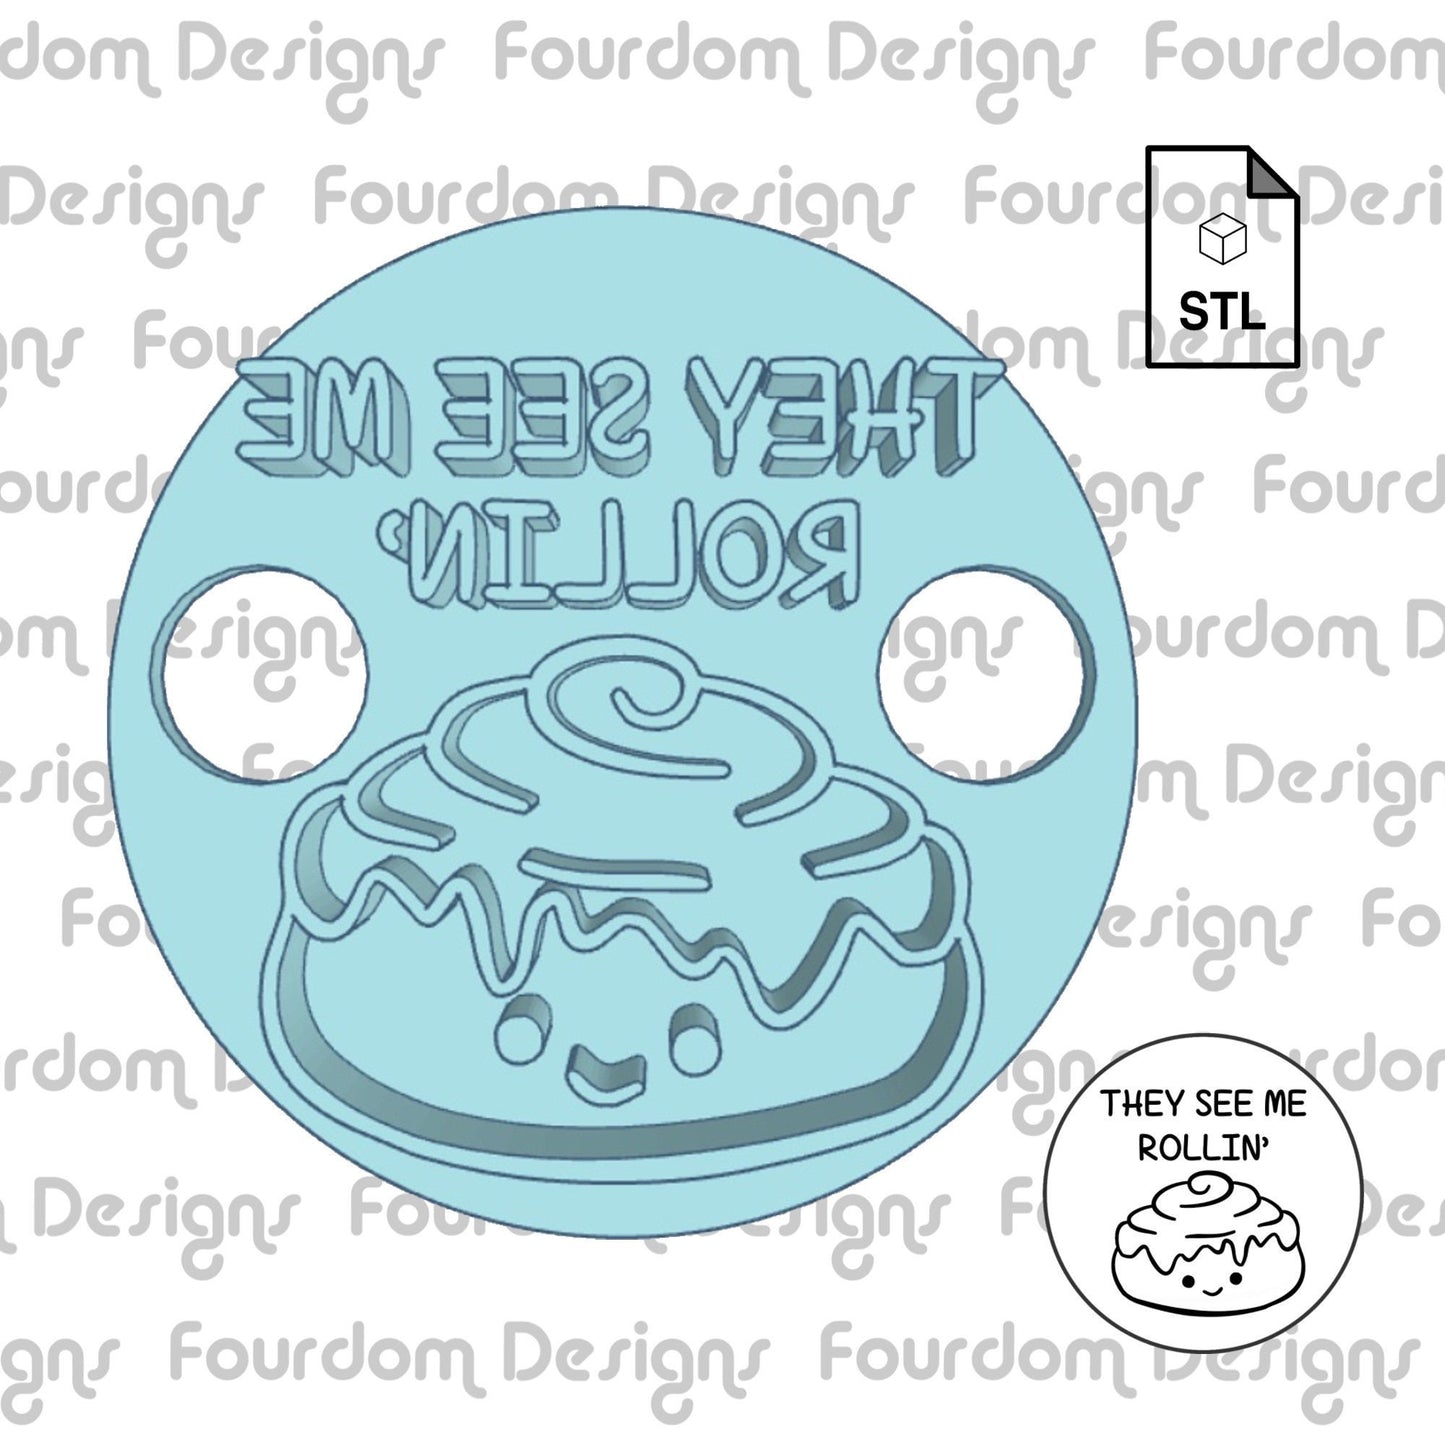 They See Me Rollin Funny Food Pun Cookie Stamp STL File Digital Download for 3D Printing Cookie Cutter Fondant Cutter Clay Cutter